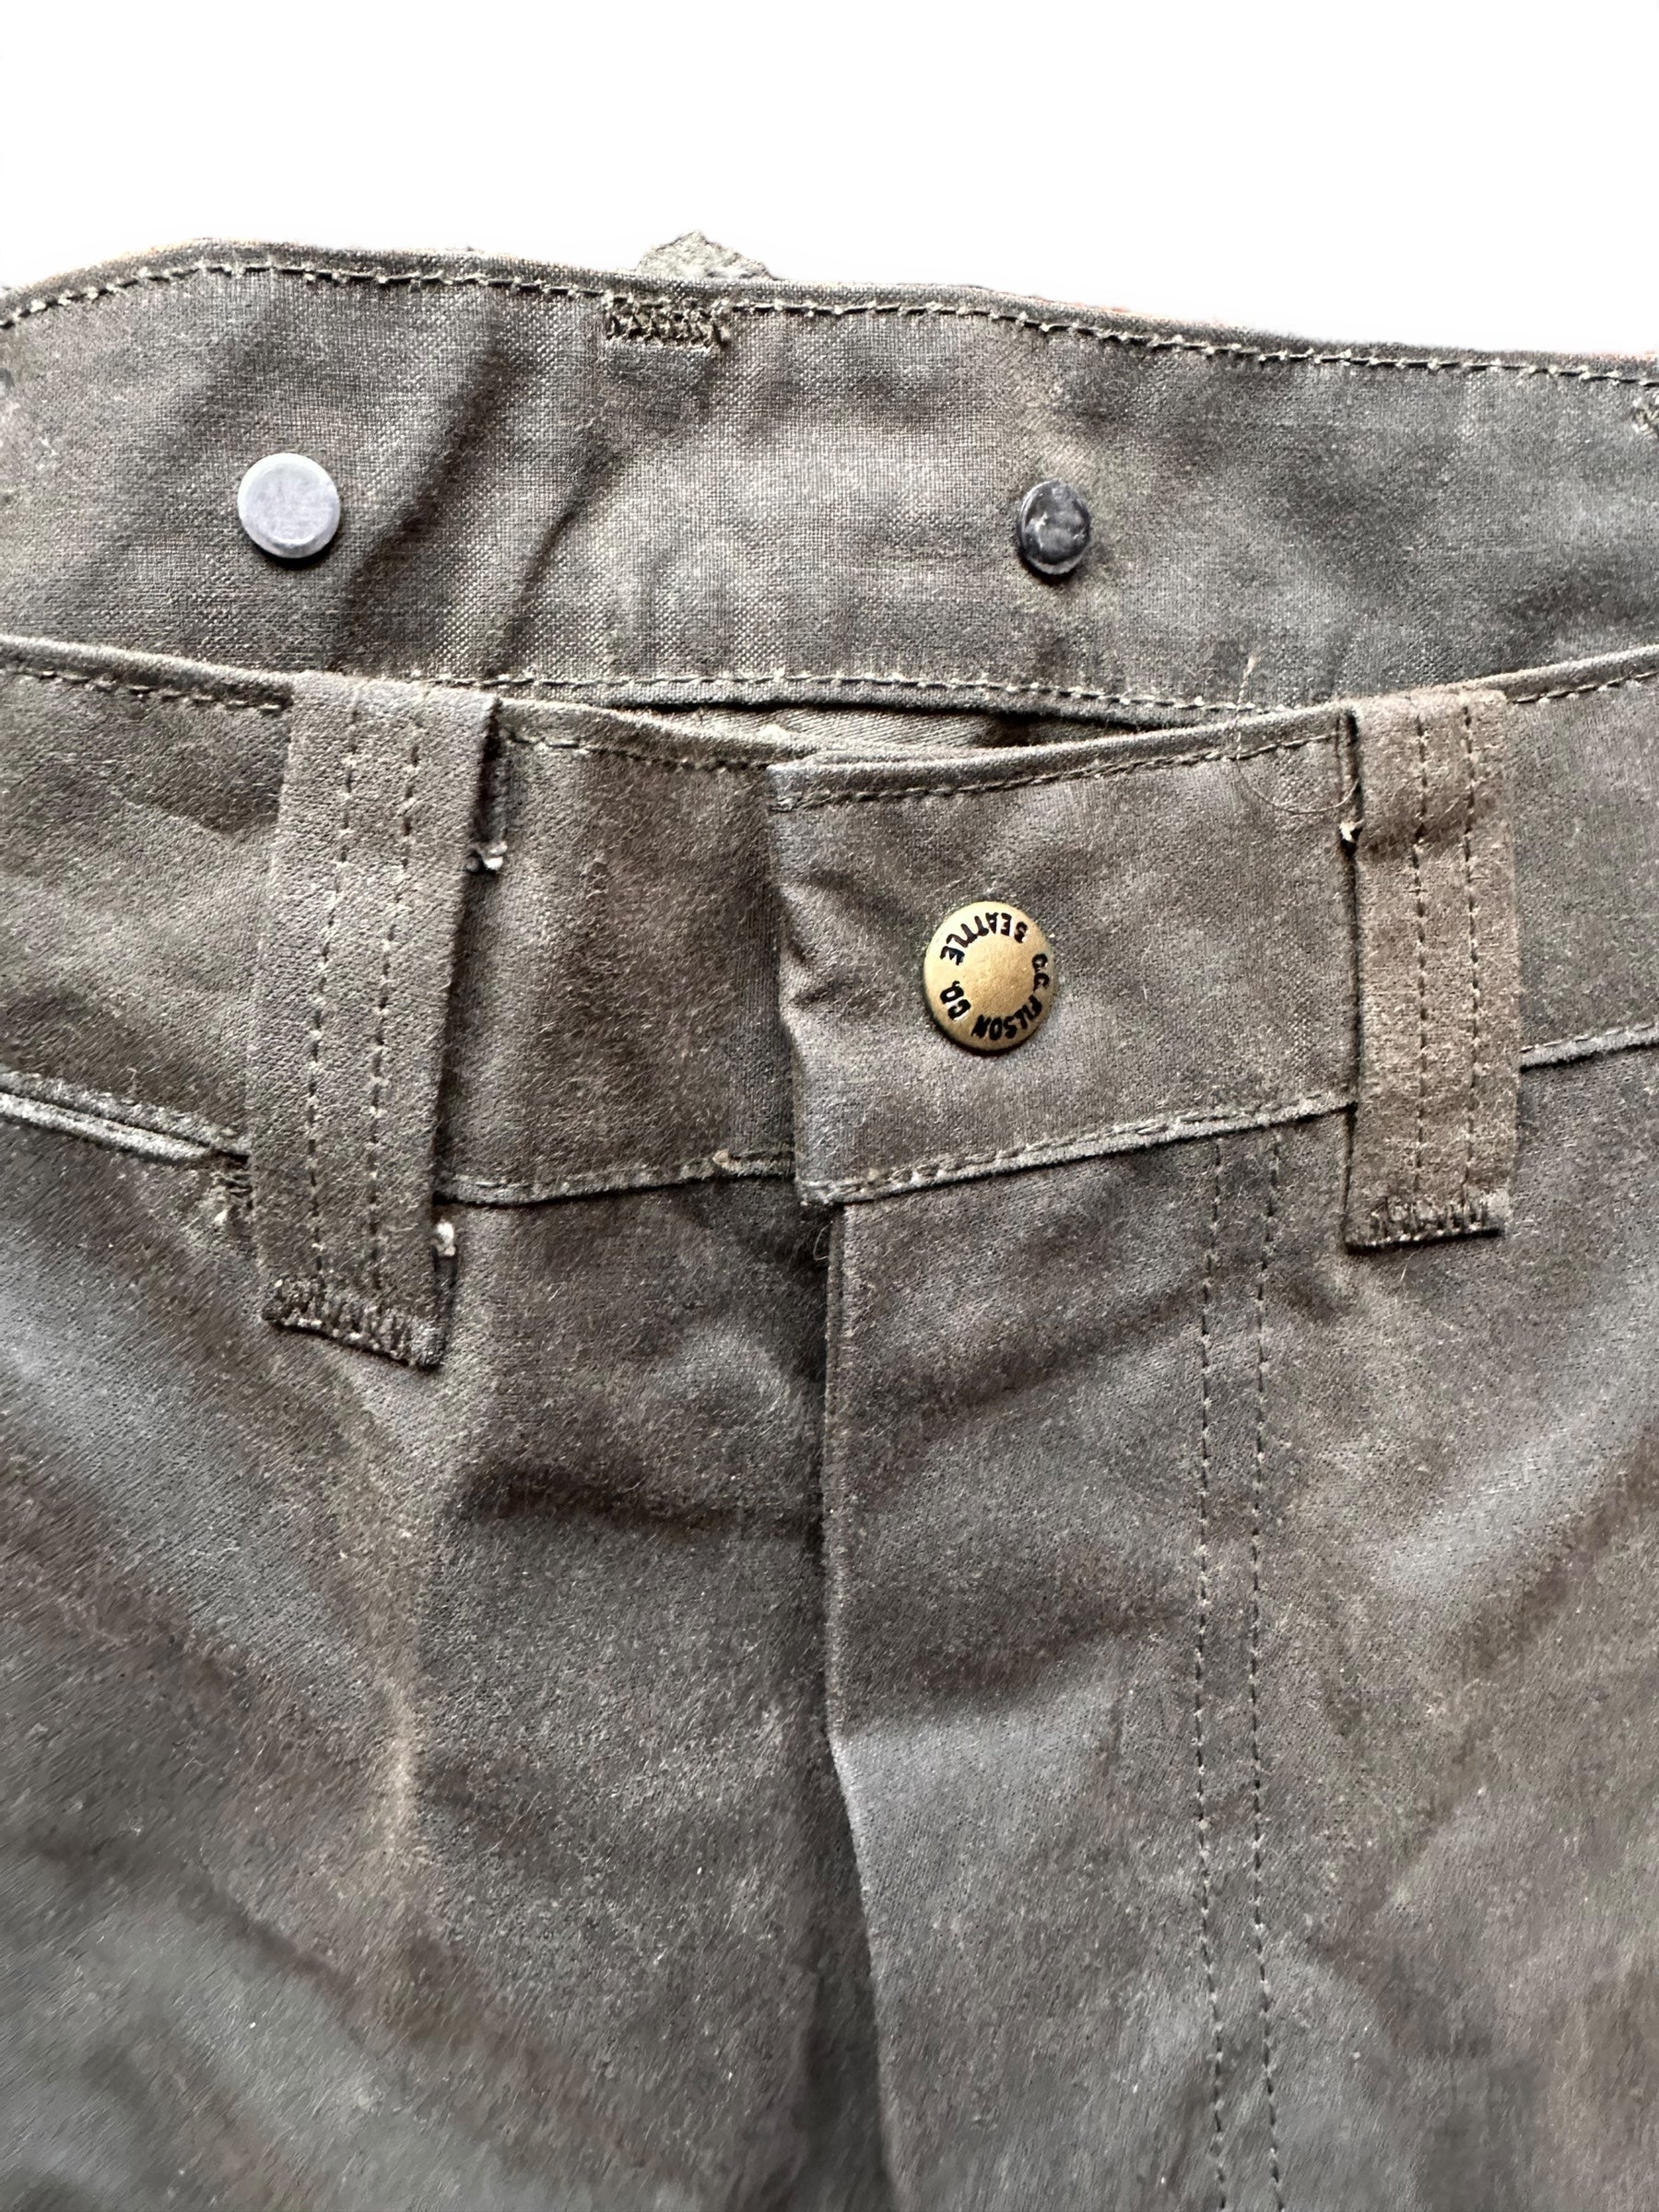 Button View on Vintage Filson Tin Cloth Double Hunting Pants W34 |  Barn Owl Vintage Goods | Filson Bargain Outlet Seattle